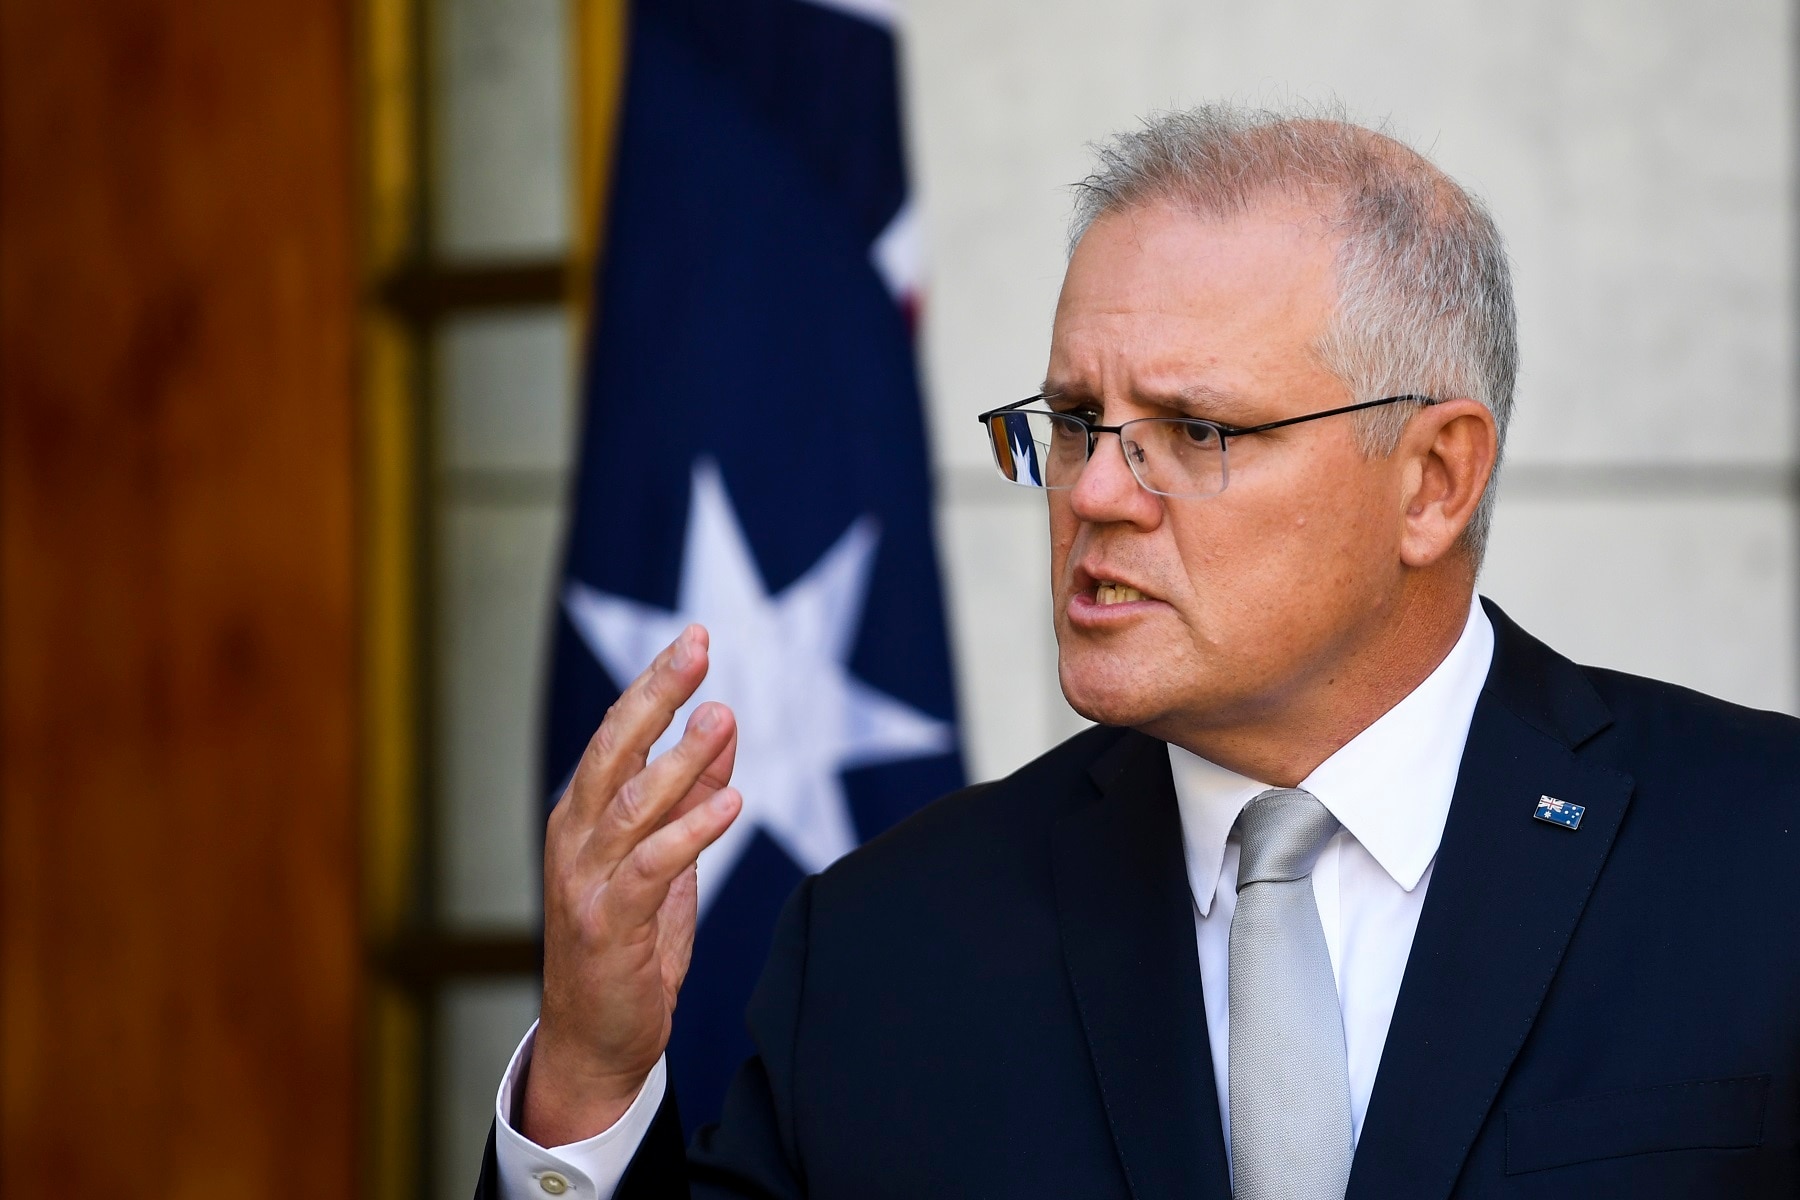 Scott Morrison has rejected suggestions there is a "don't ask, don't tell" culture within the government.